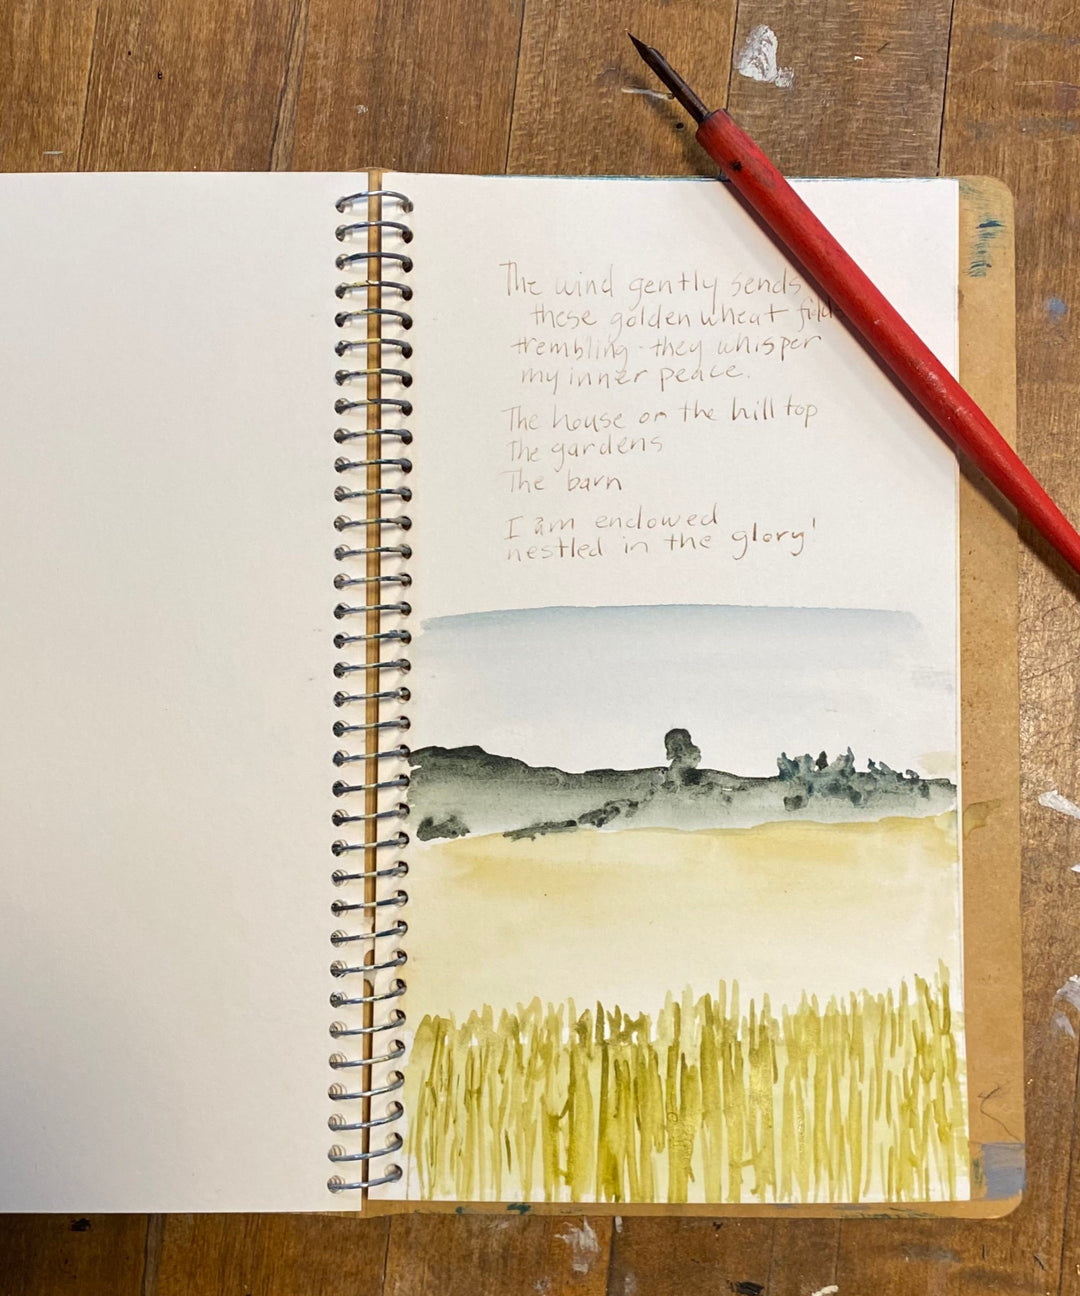 Poetry and place in an artist's sketchbook